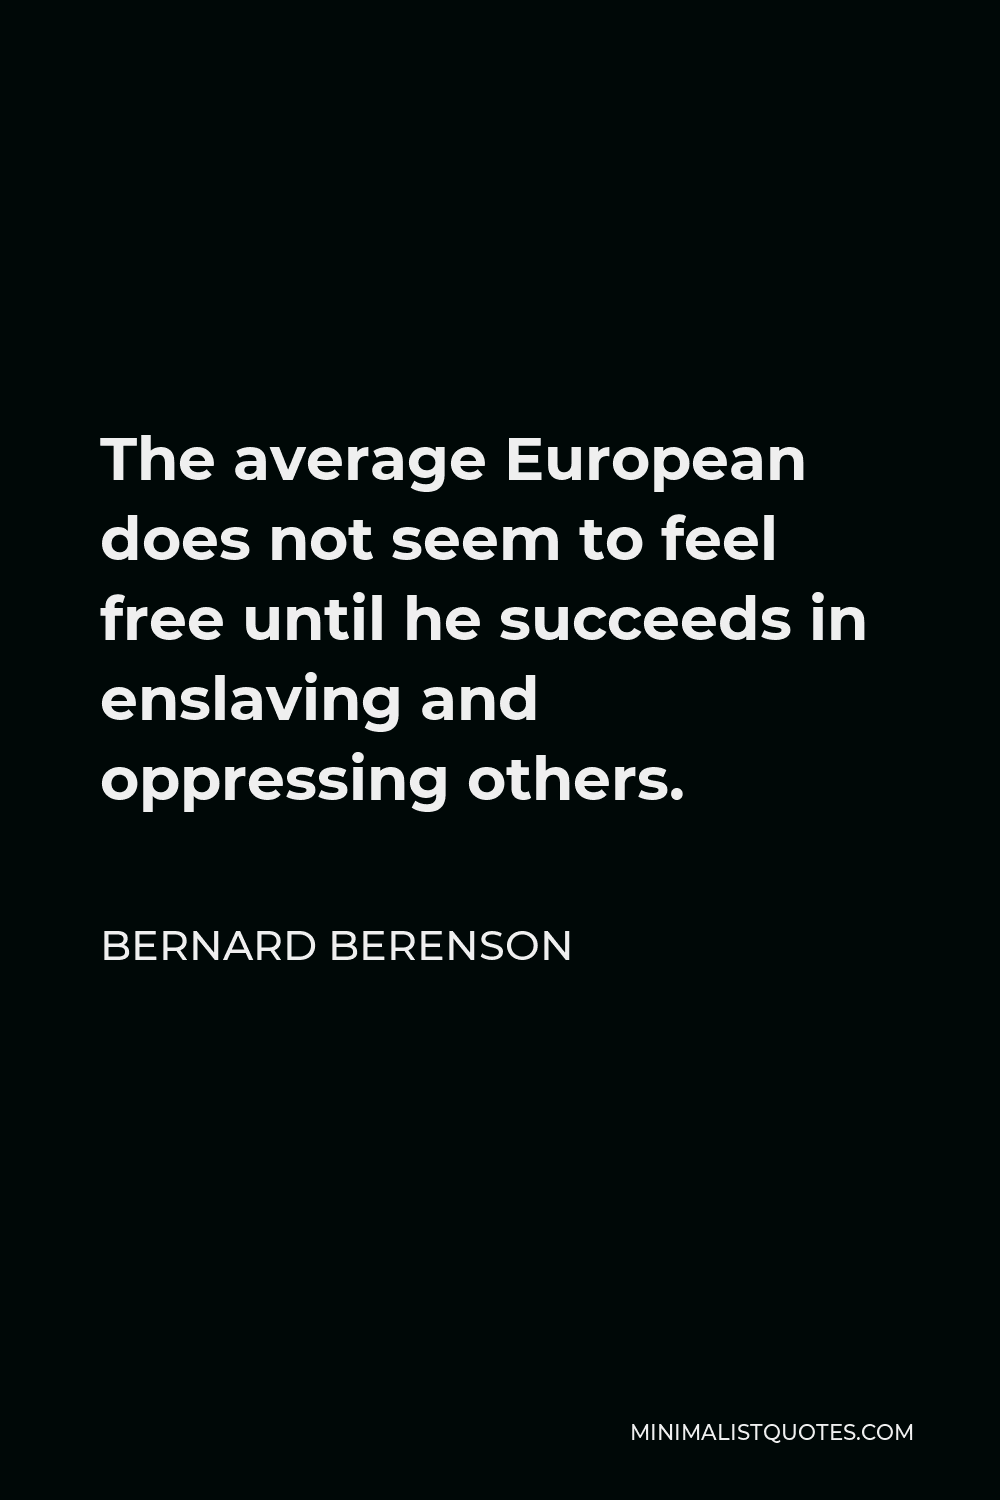 Bernard Berenson Quote - The average European does not seem to feel free until he succeeds in enslaving and oppressing others.